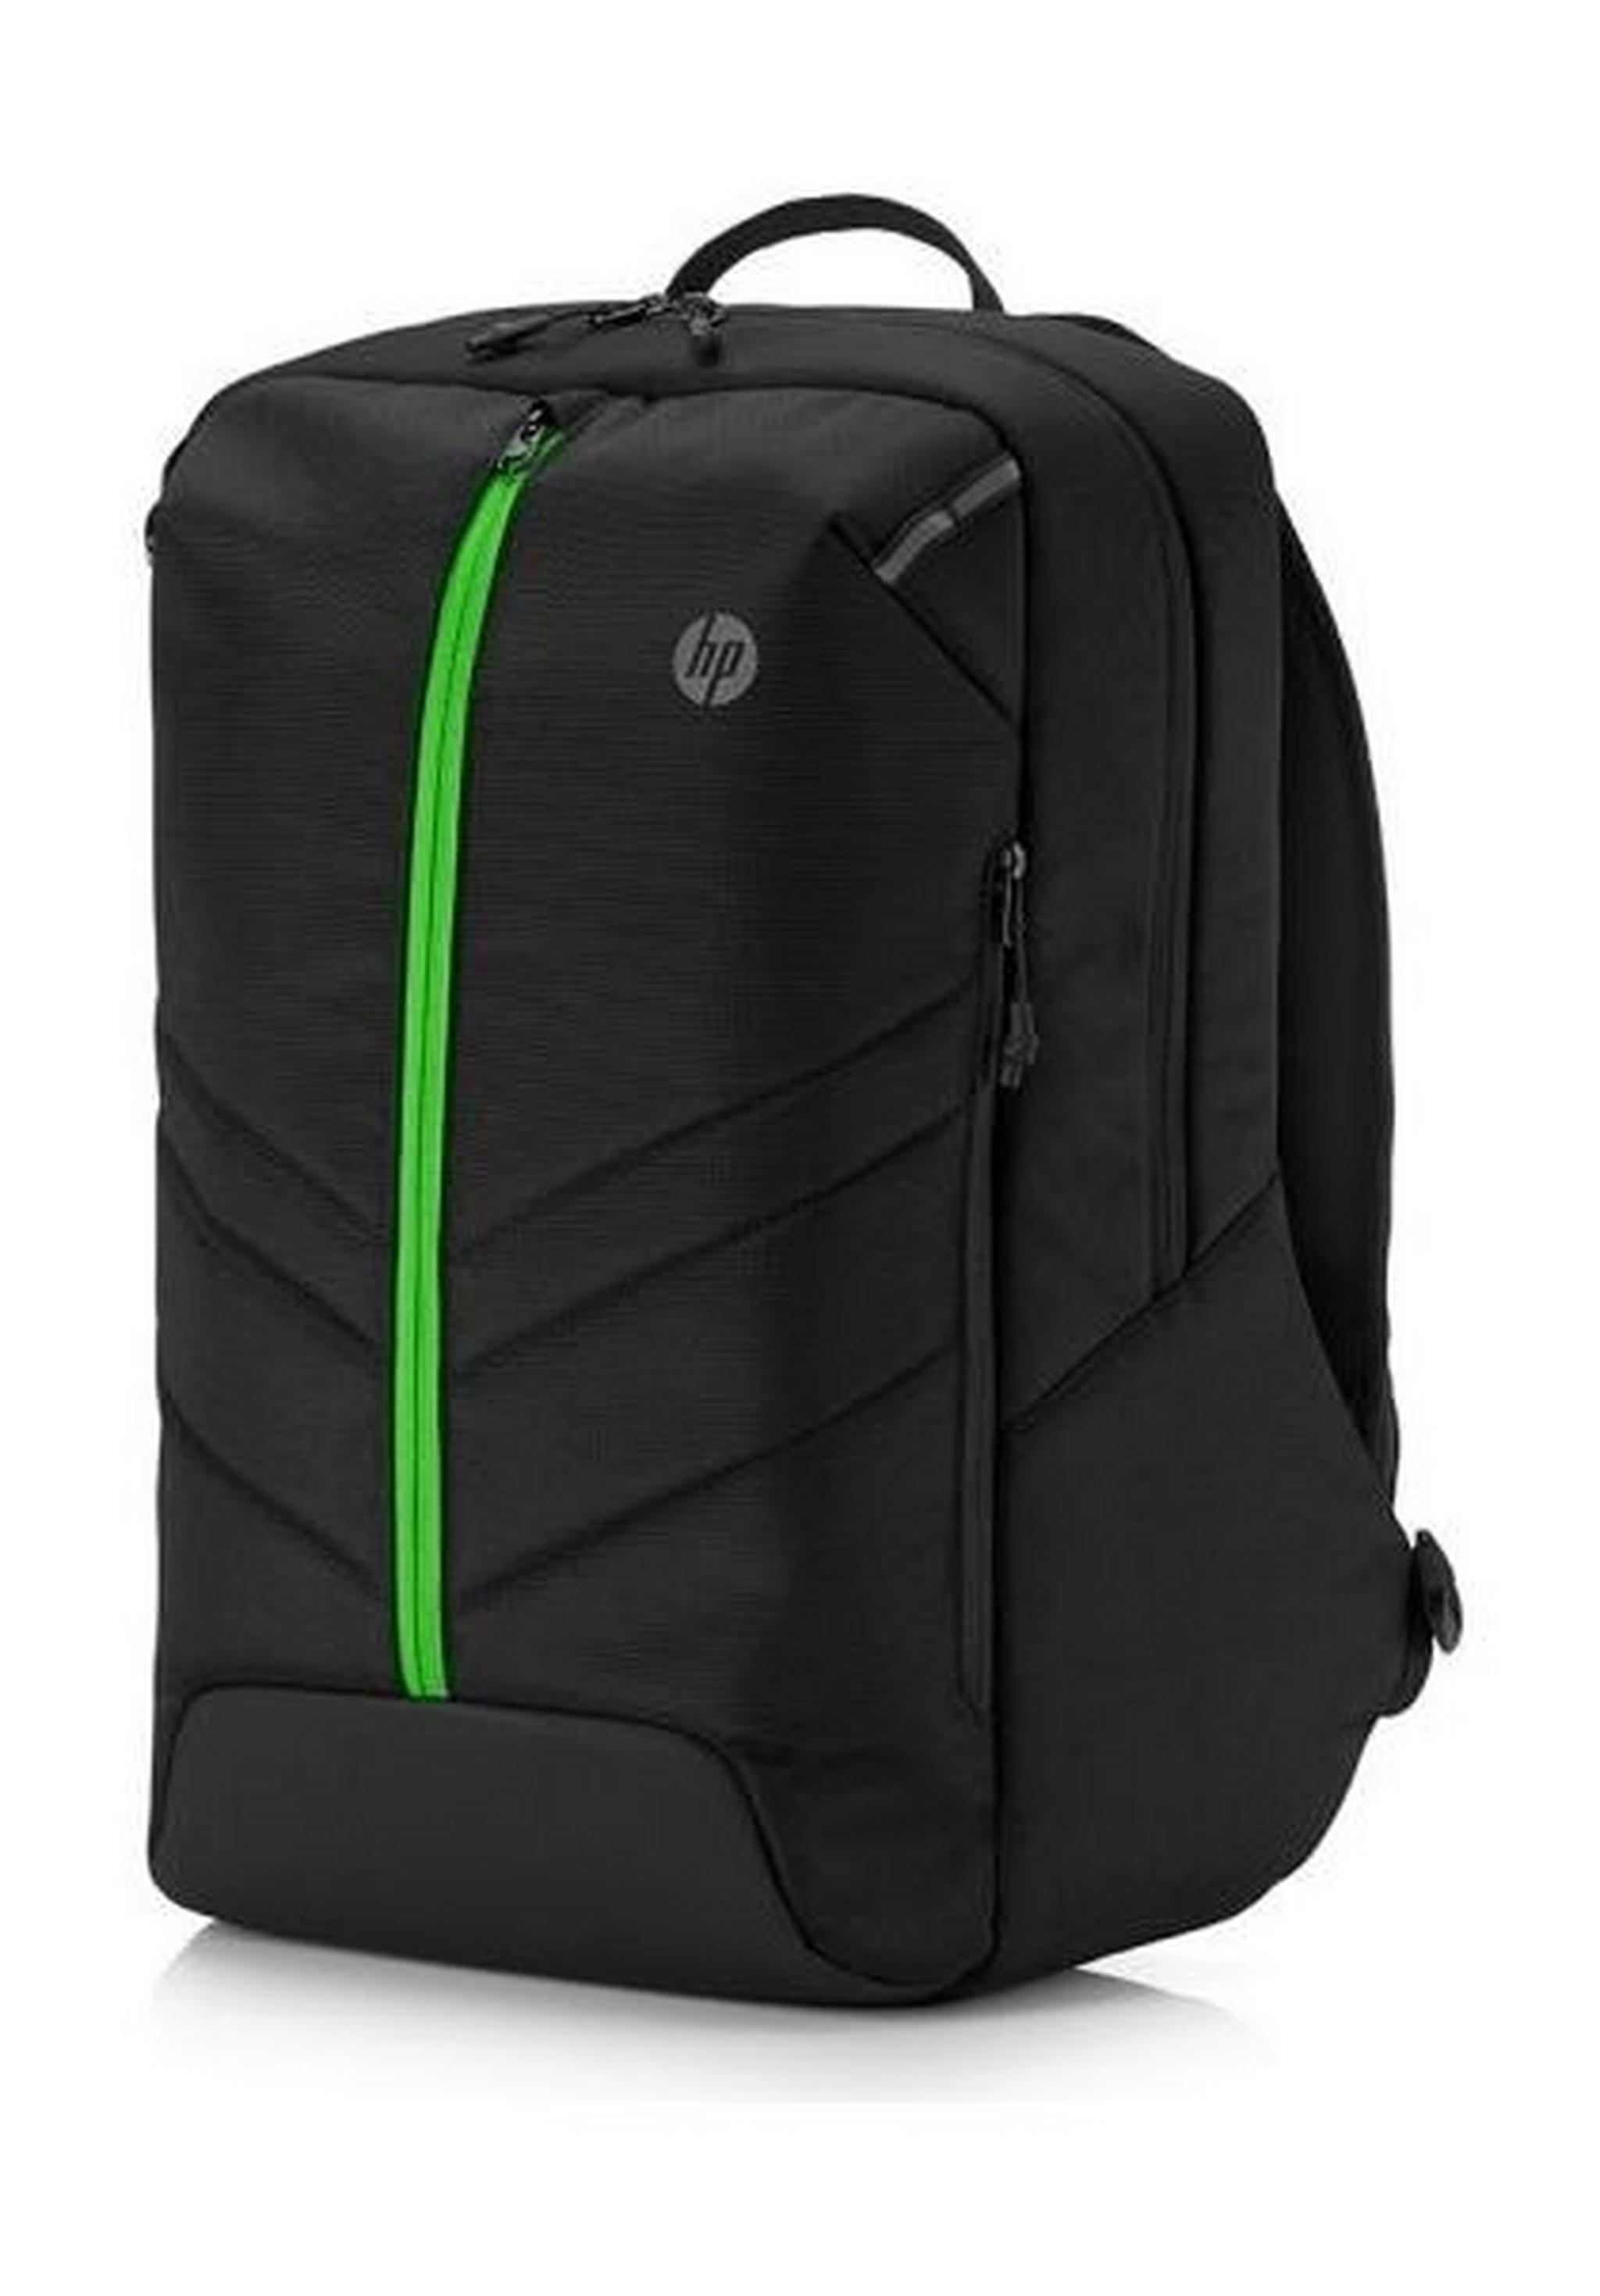 HP Pavilion Gaming Backpack 500 for up to 17.3-inch Laptop